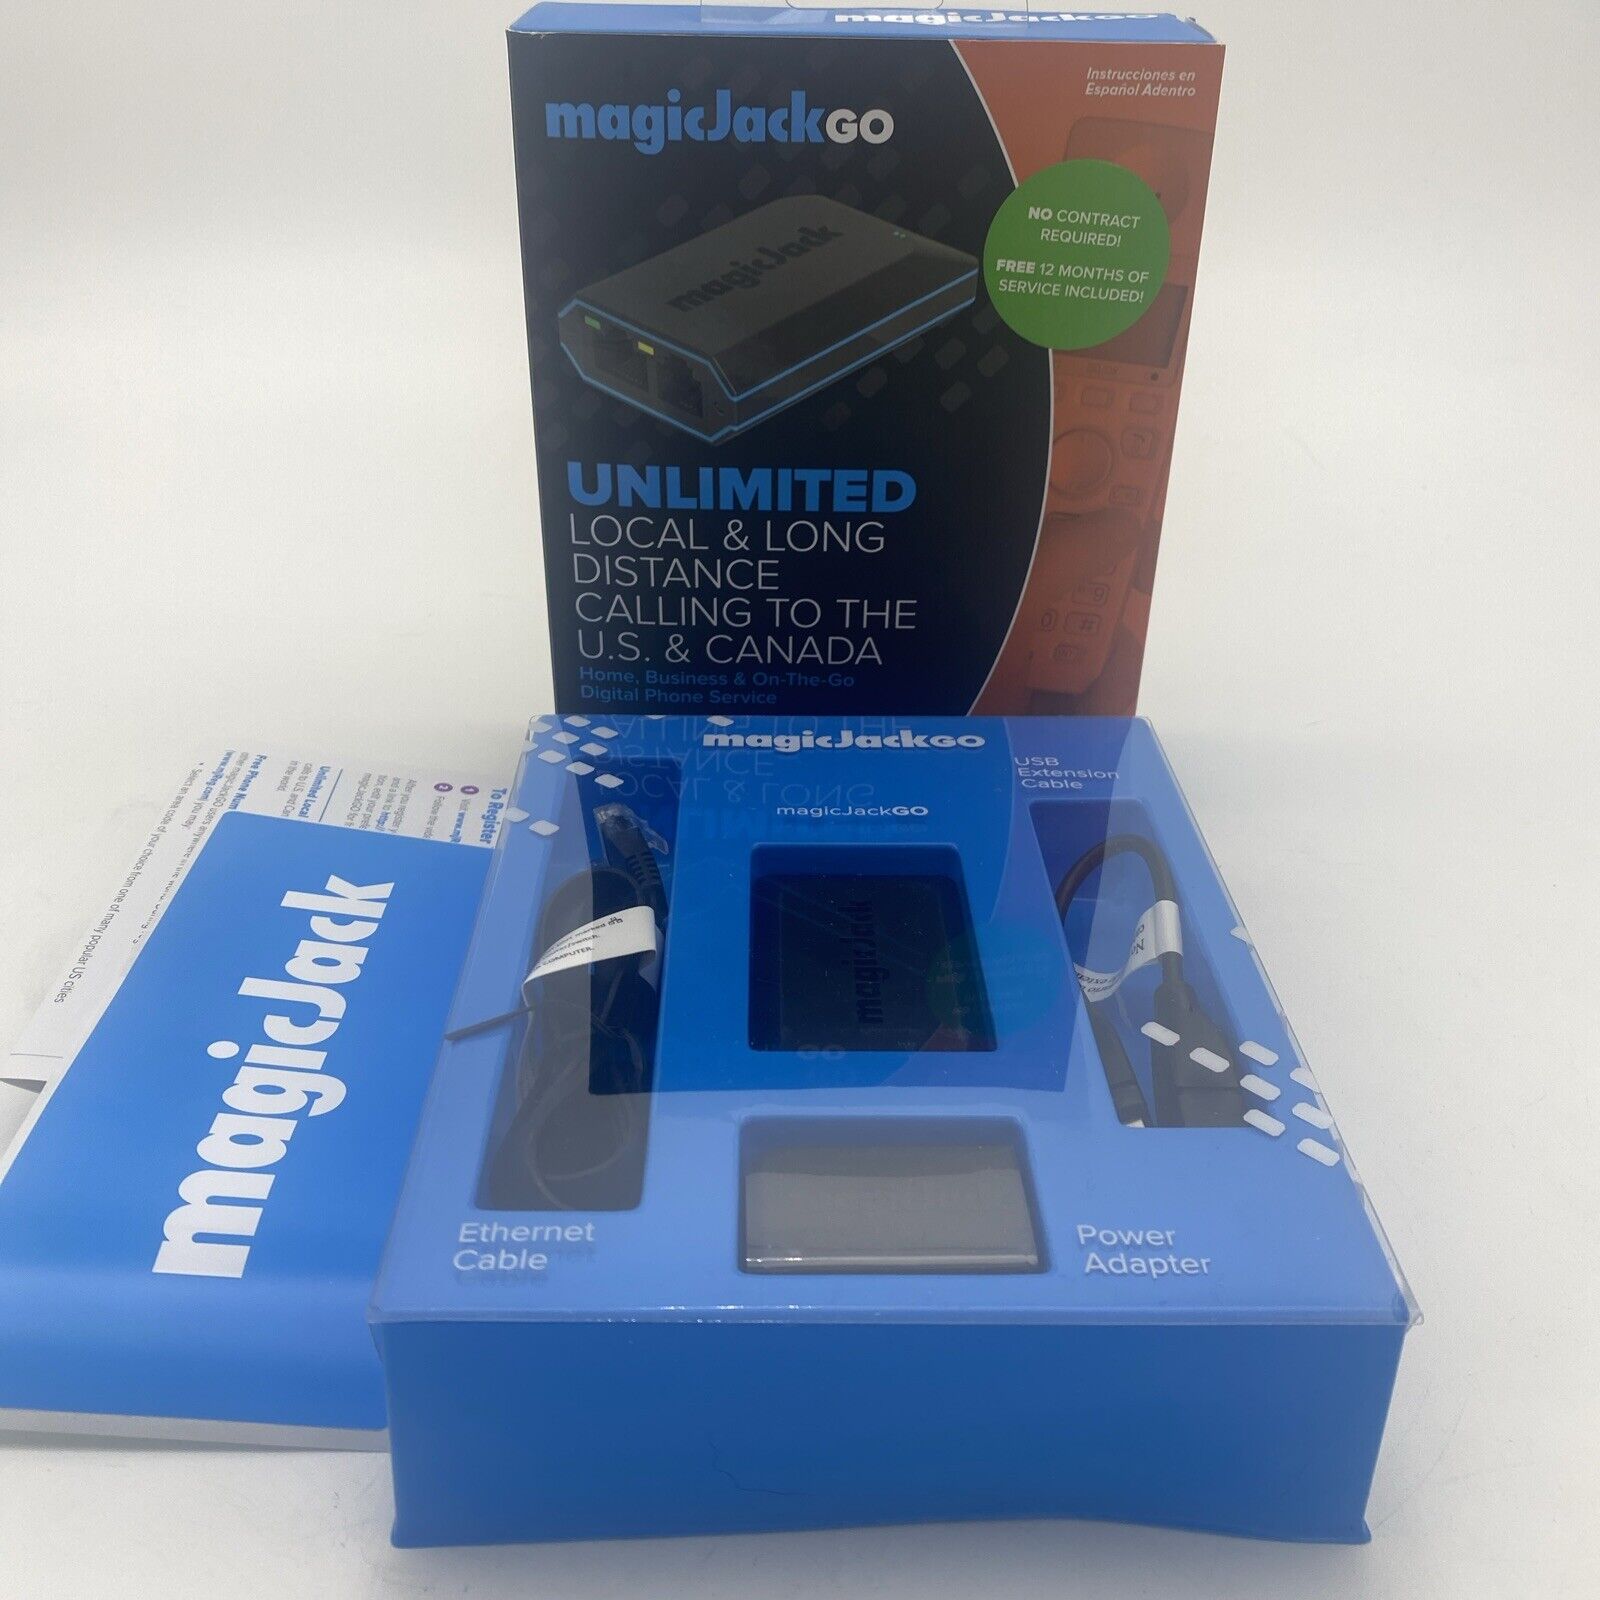 MAGIC JACK GO Smart Home/Business on the Go Digital Phone Service with Adapter